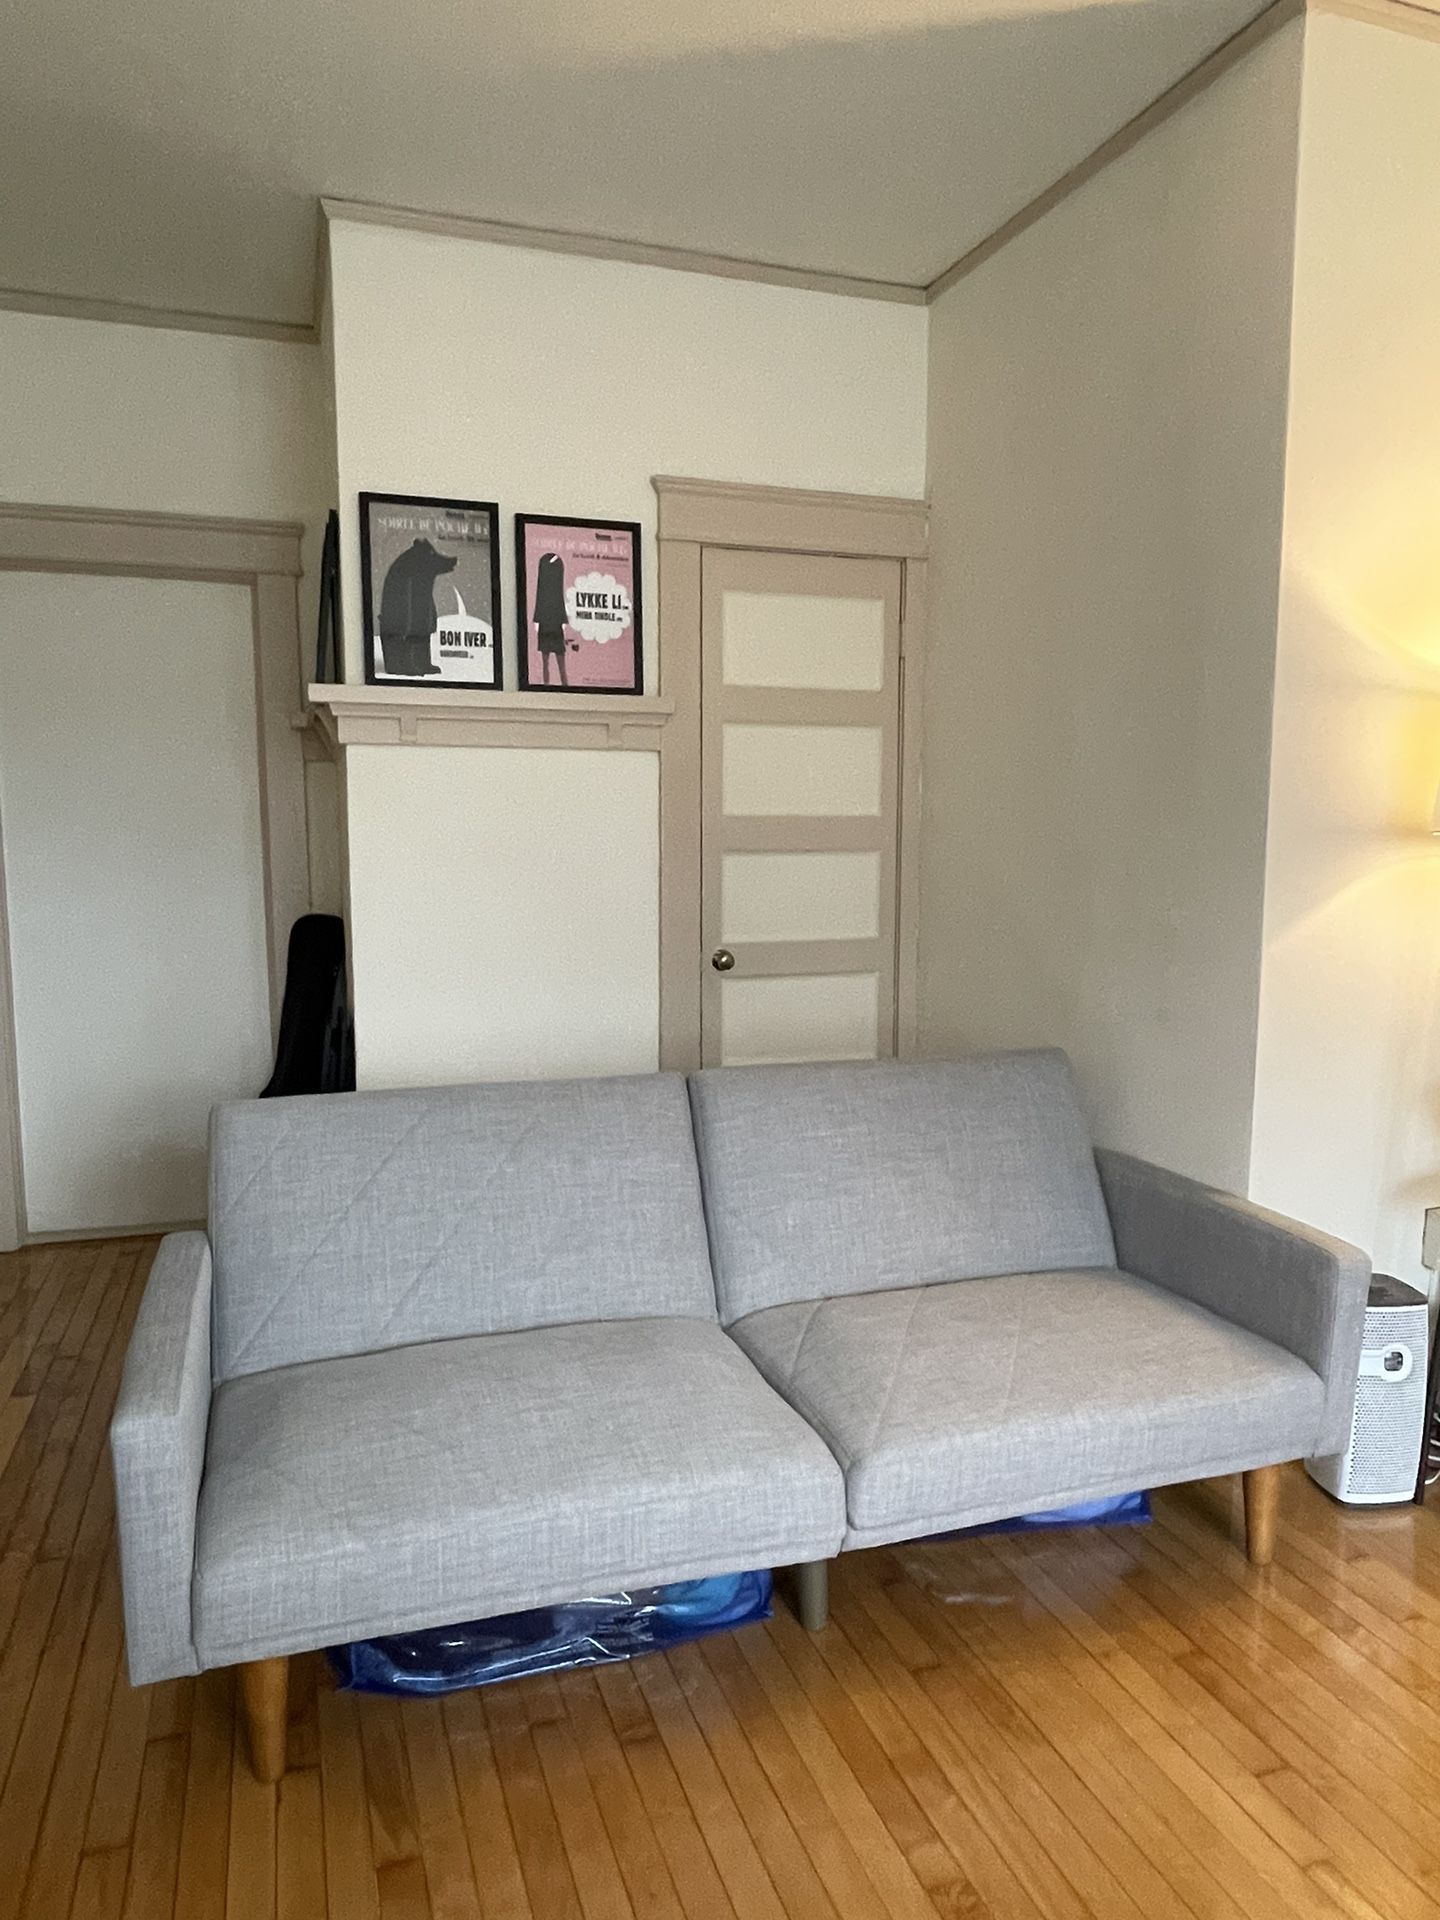 MUST GO ASAP: Gray Sofa - Folds Into Twin Bed